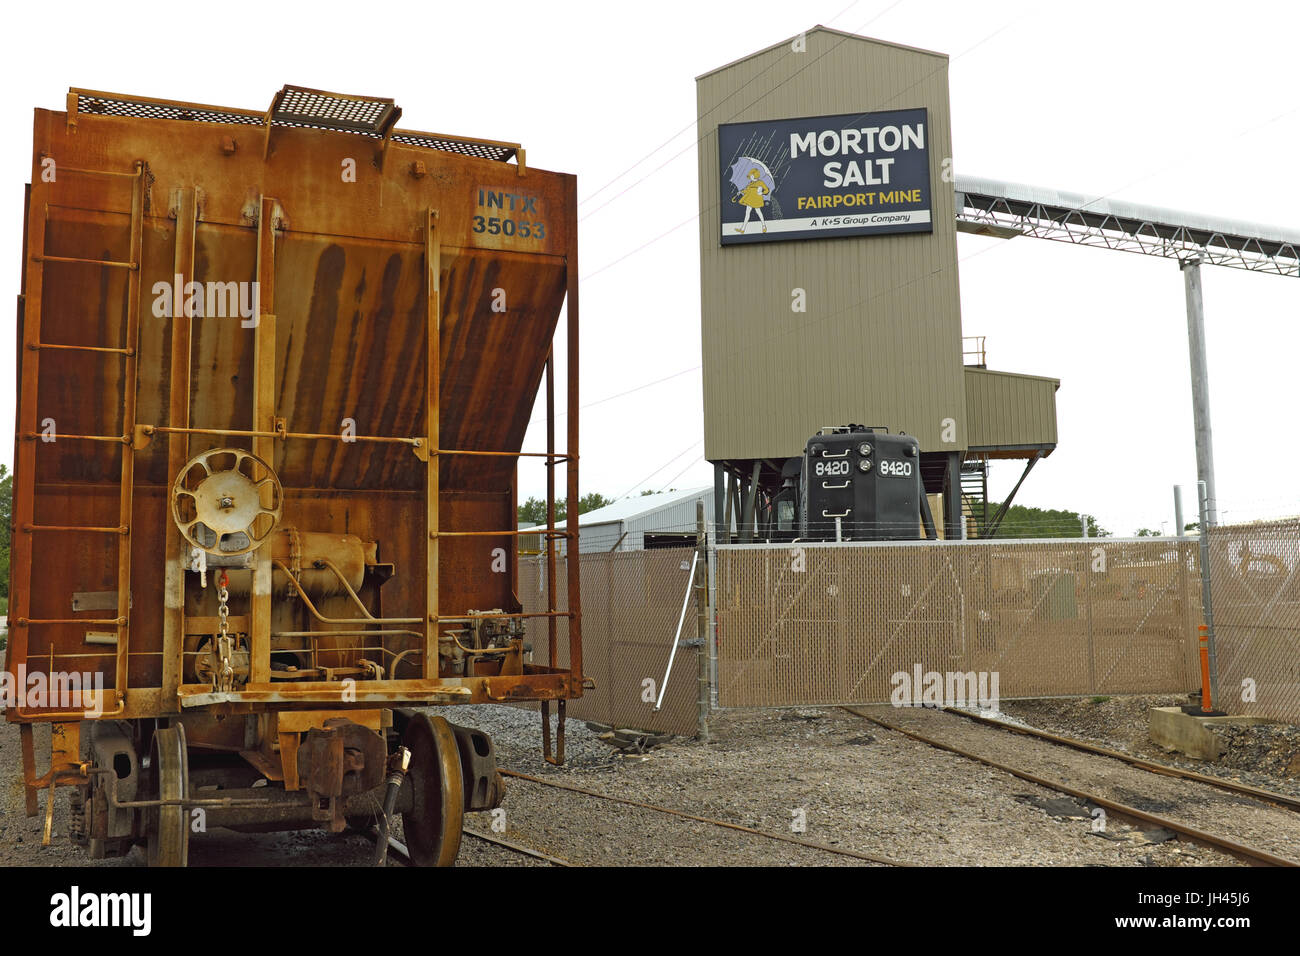 The Morton Salt Fairport Harbor Mine located outside Cleveland, Ohio, is a primary producer of salt which gathers the resource from below Lake Erie. Stock Photo